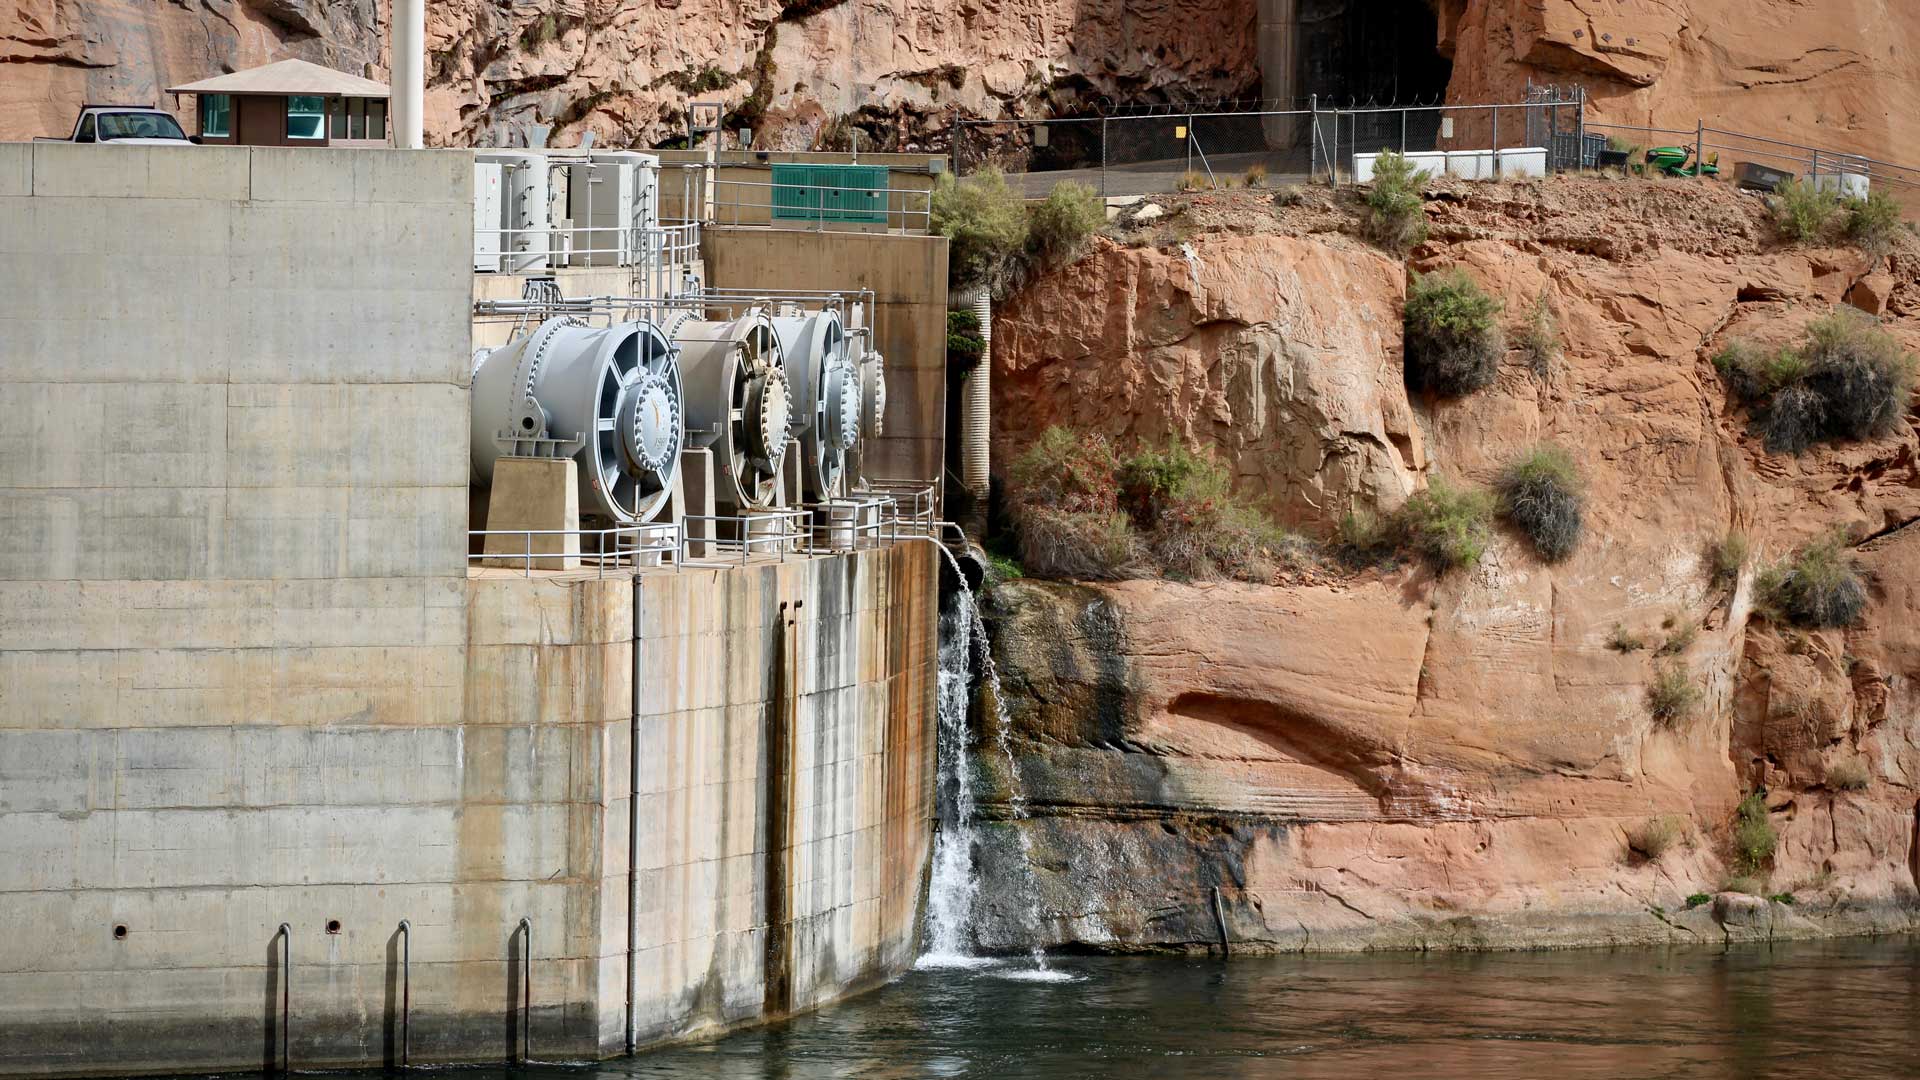 A set of four tubes known as the "river outlet works" allows extra water to flow through the Glen Canyon Dam. The flows are designed to take advantage of extra wet years and help wildlife habitat downstream of the dam.
